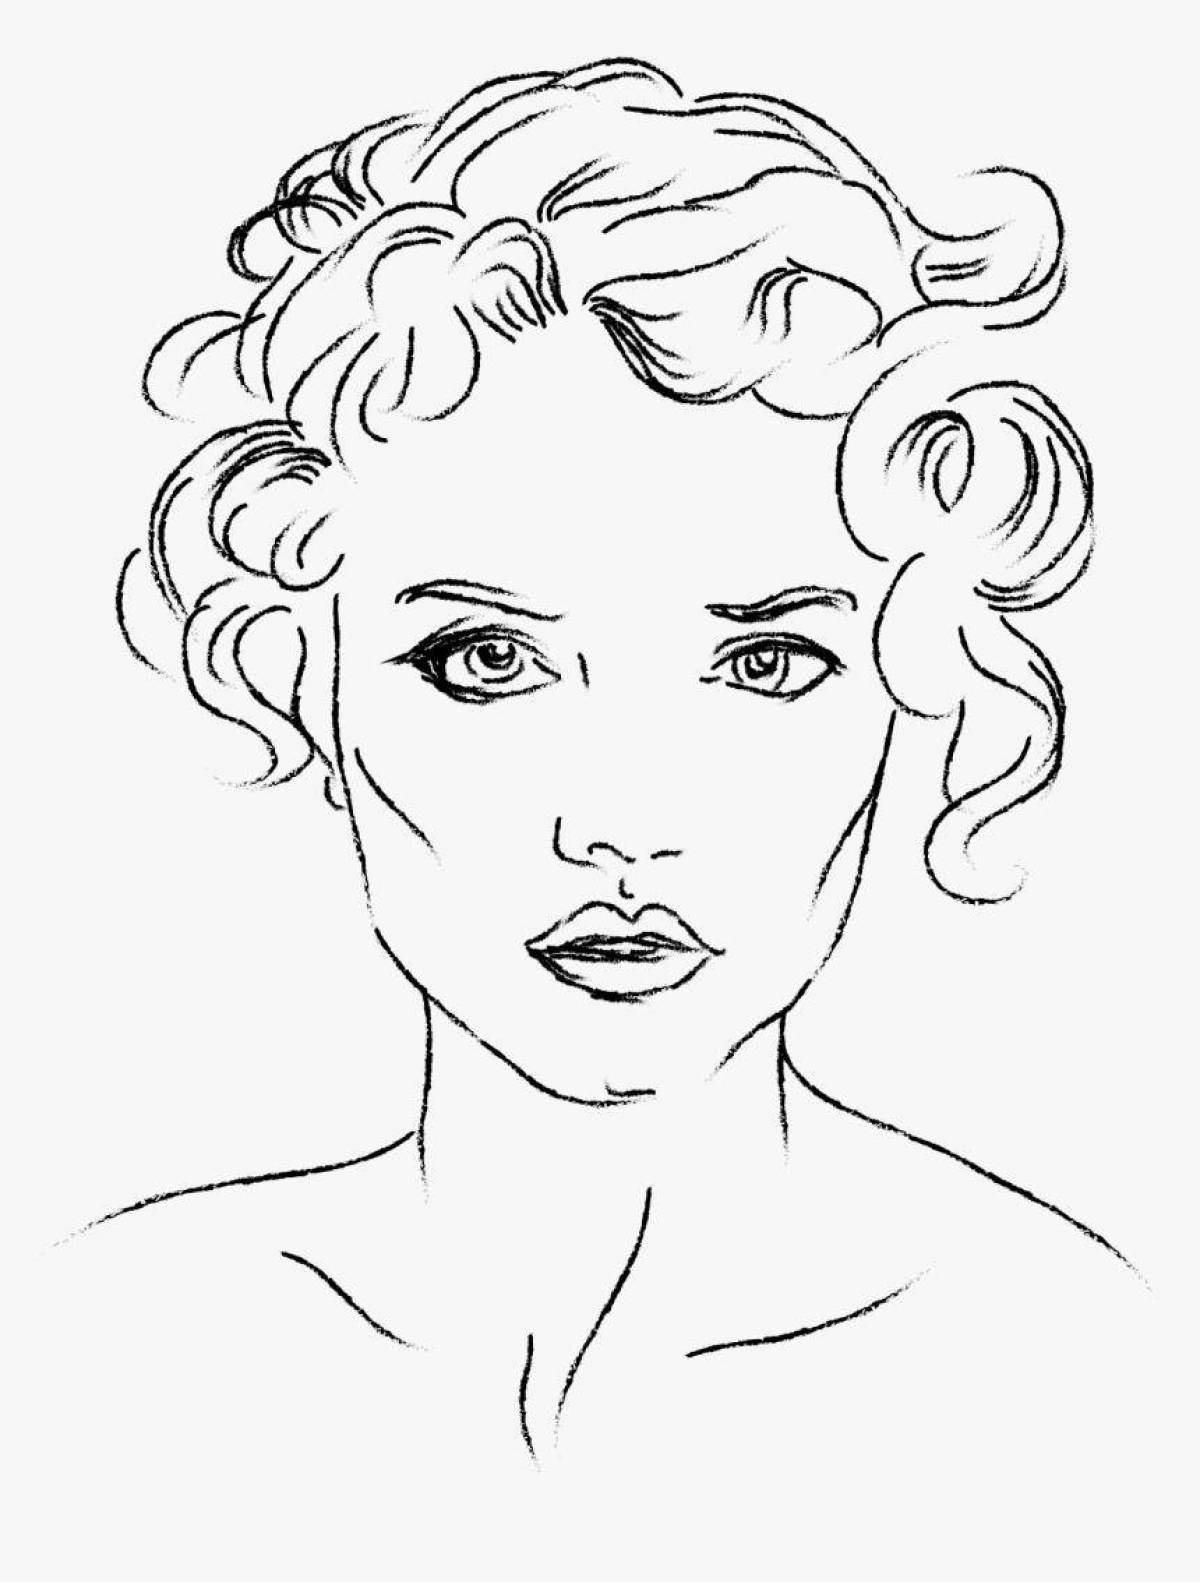 Animated drawing of a girl's face